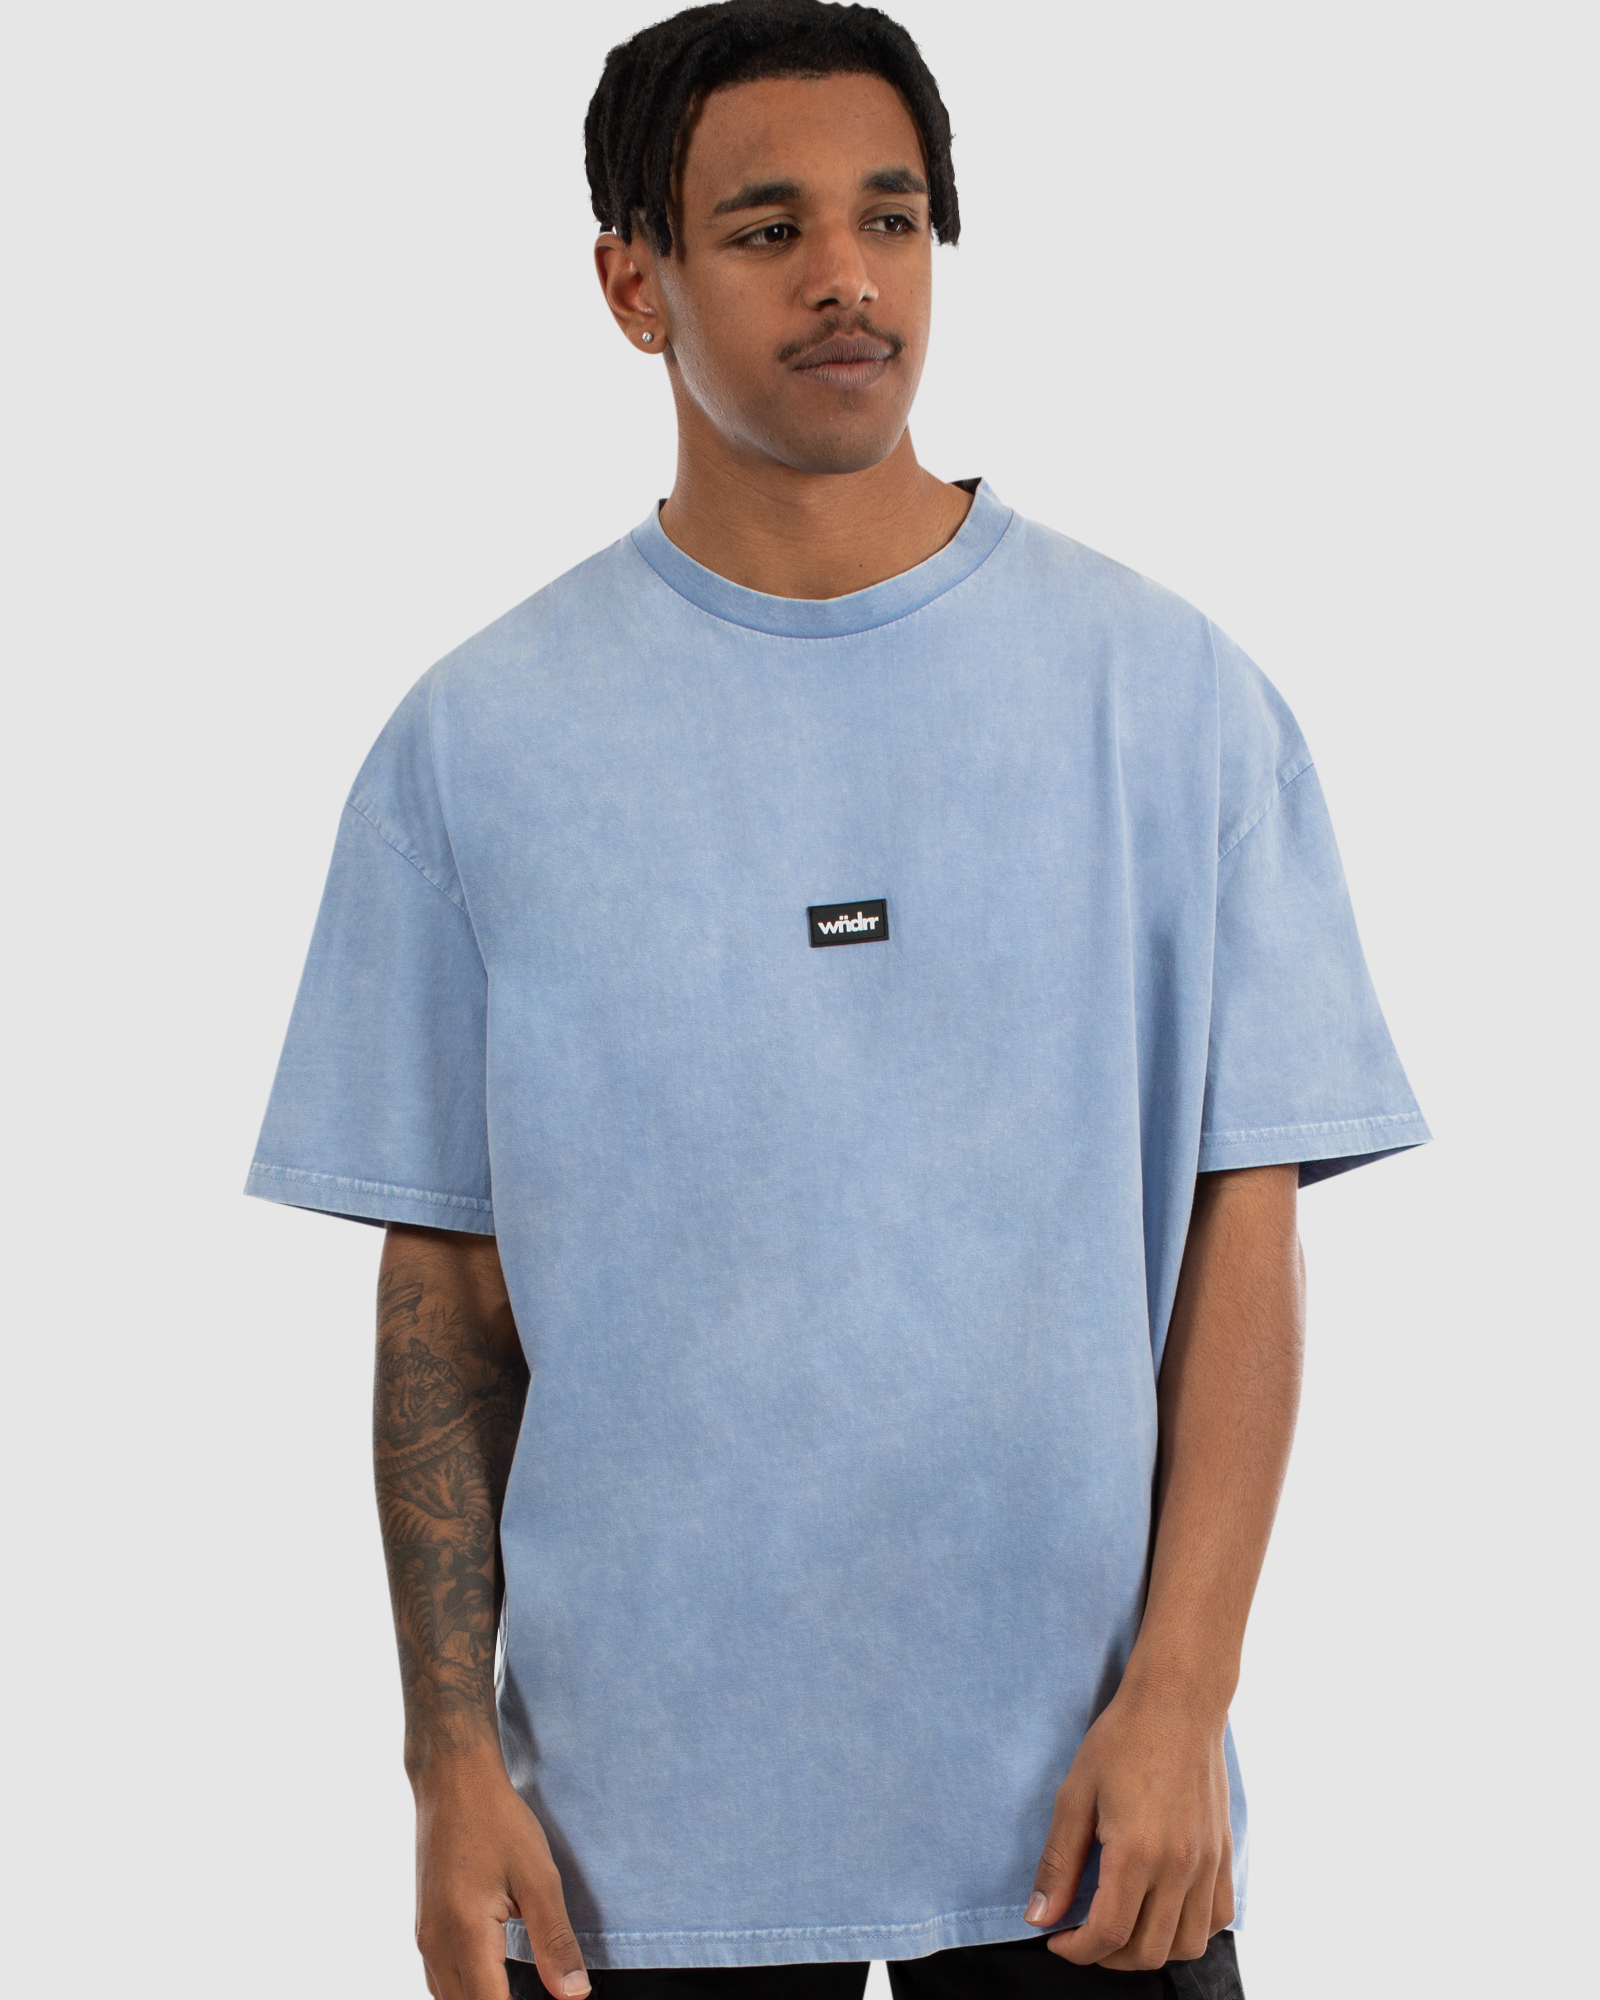 HOXTON VINTAGE FIT TEE - WASHED BLUE